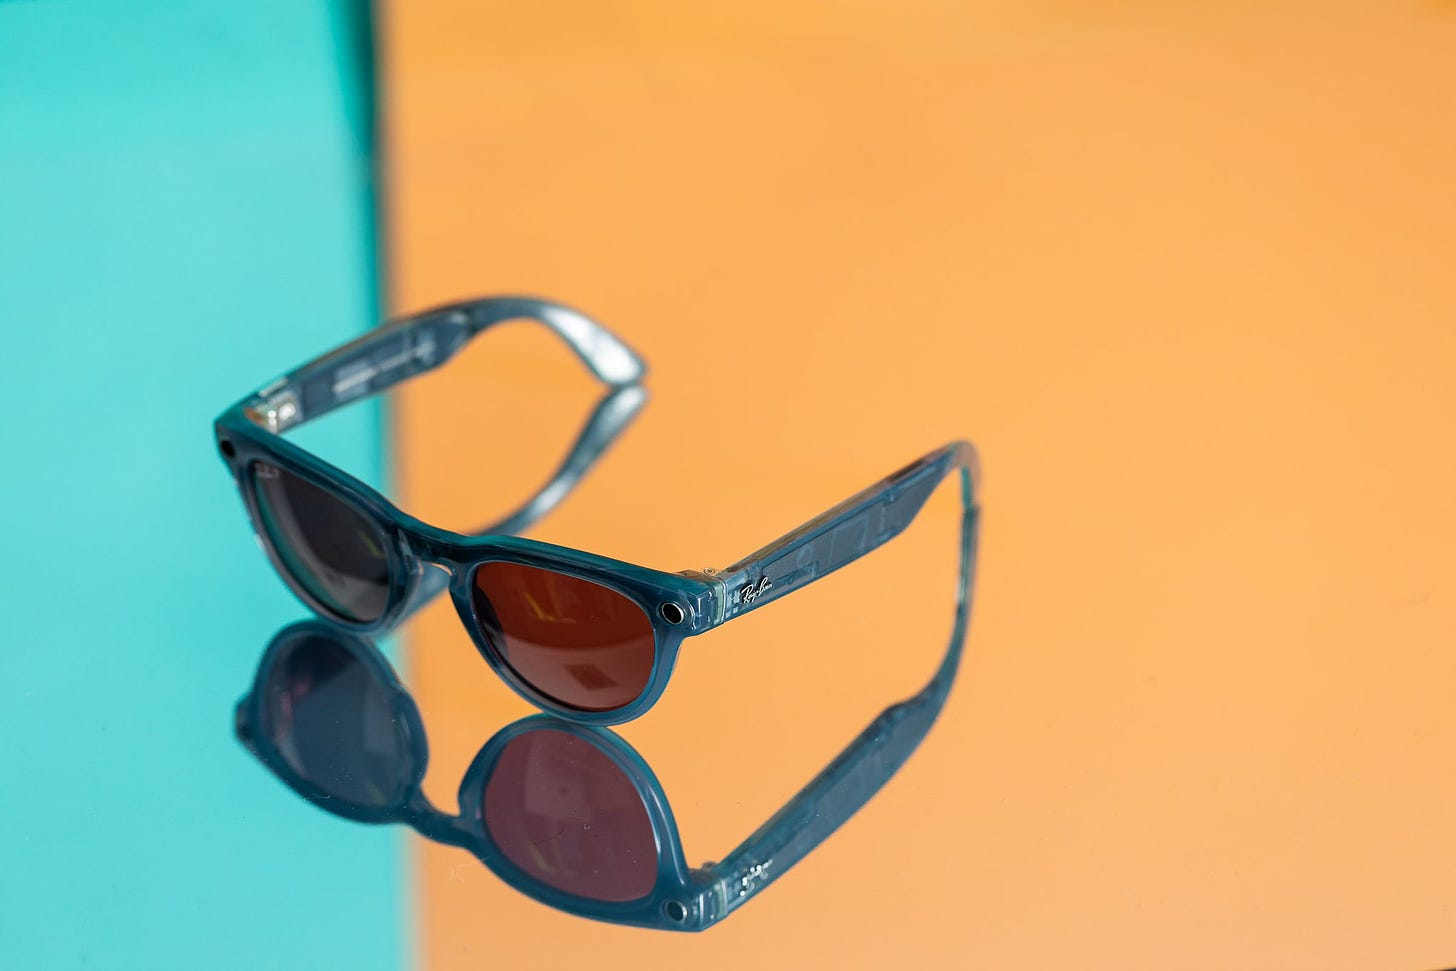 A photo showing the Ray-Ban Meta Smart Glasses on a blue and yellow background